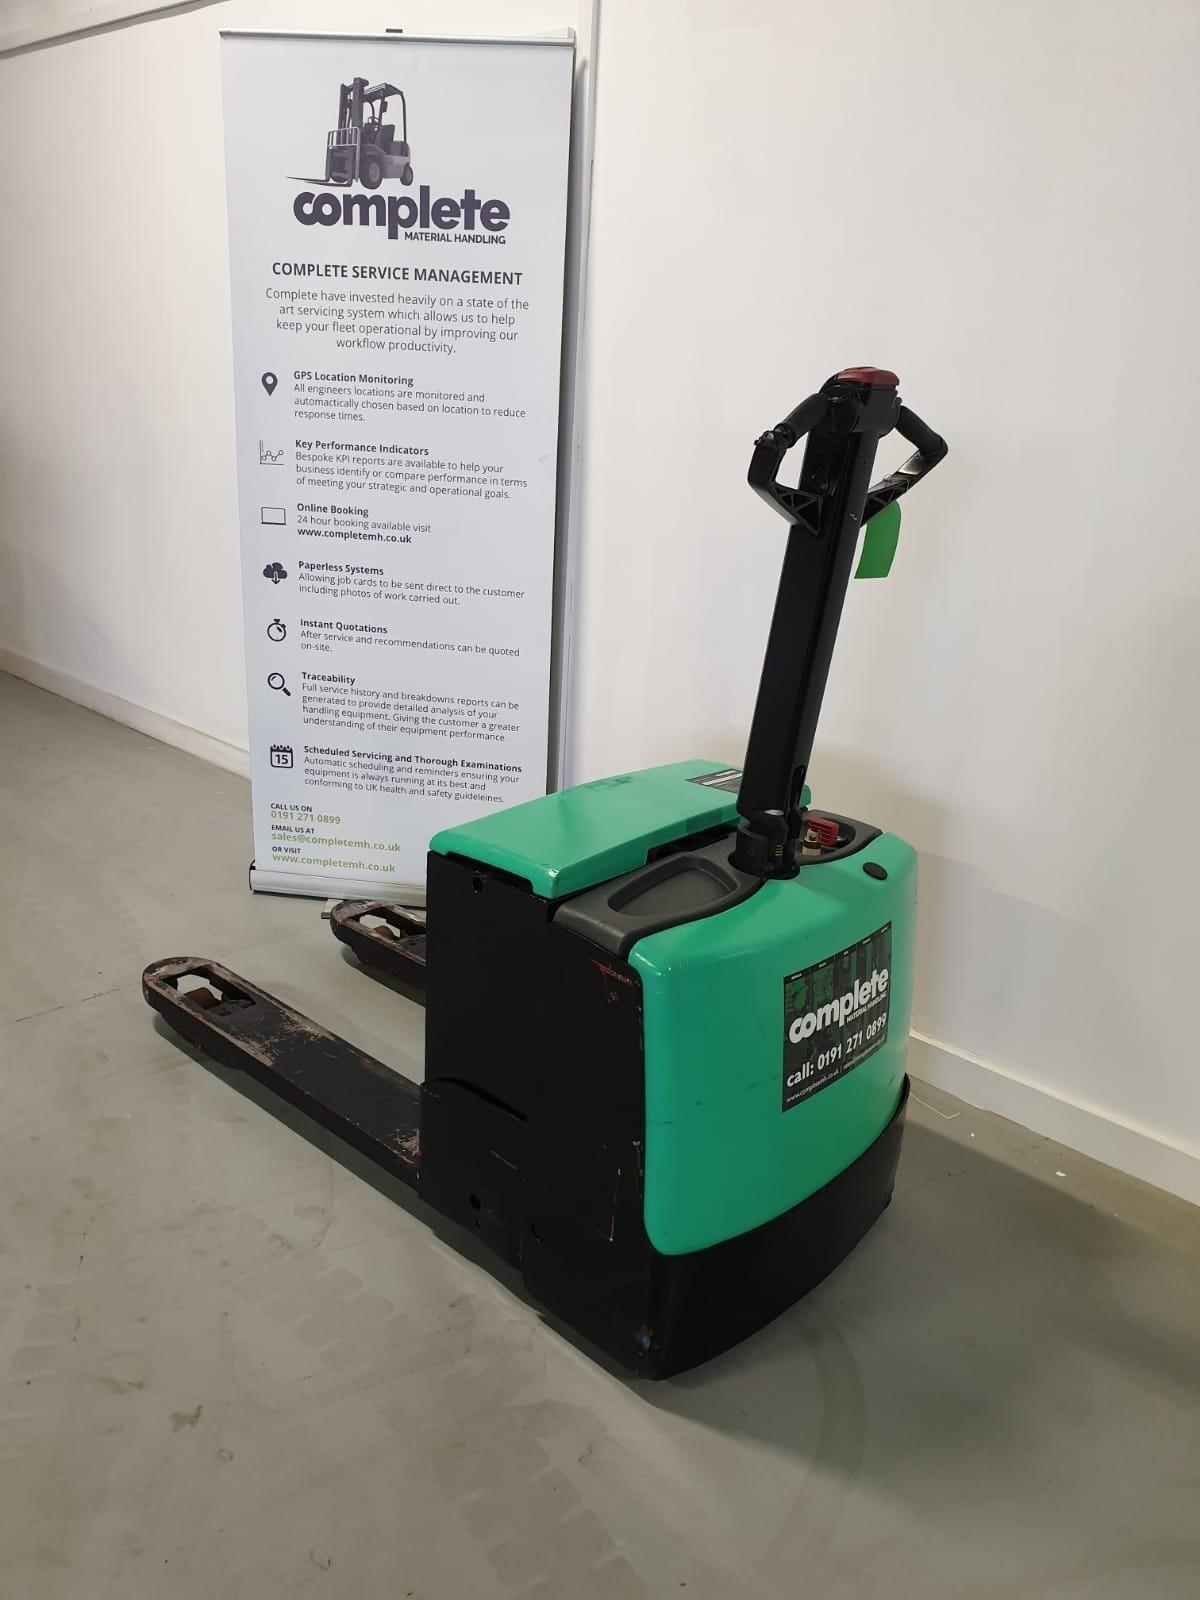 Product Mitsubishi PBO20M Powered Pallet Truck | Complete Material Handling image